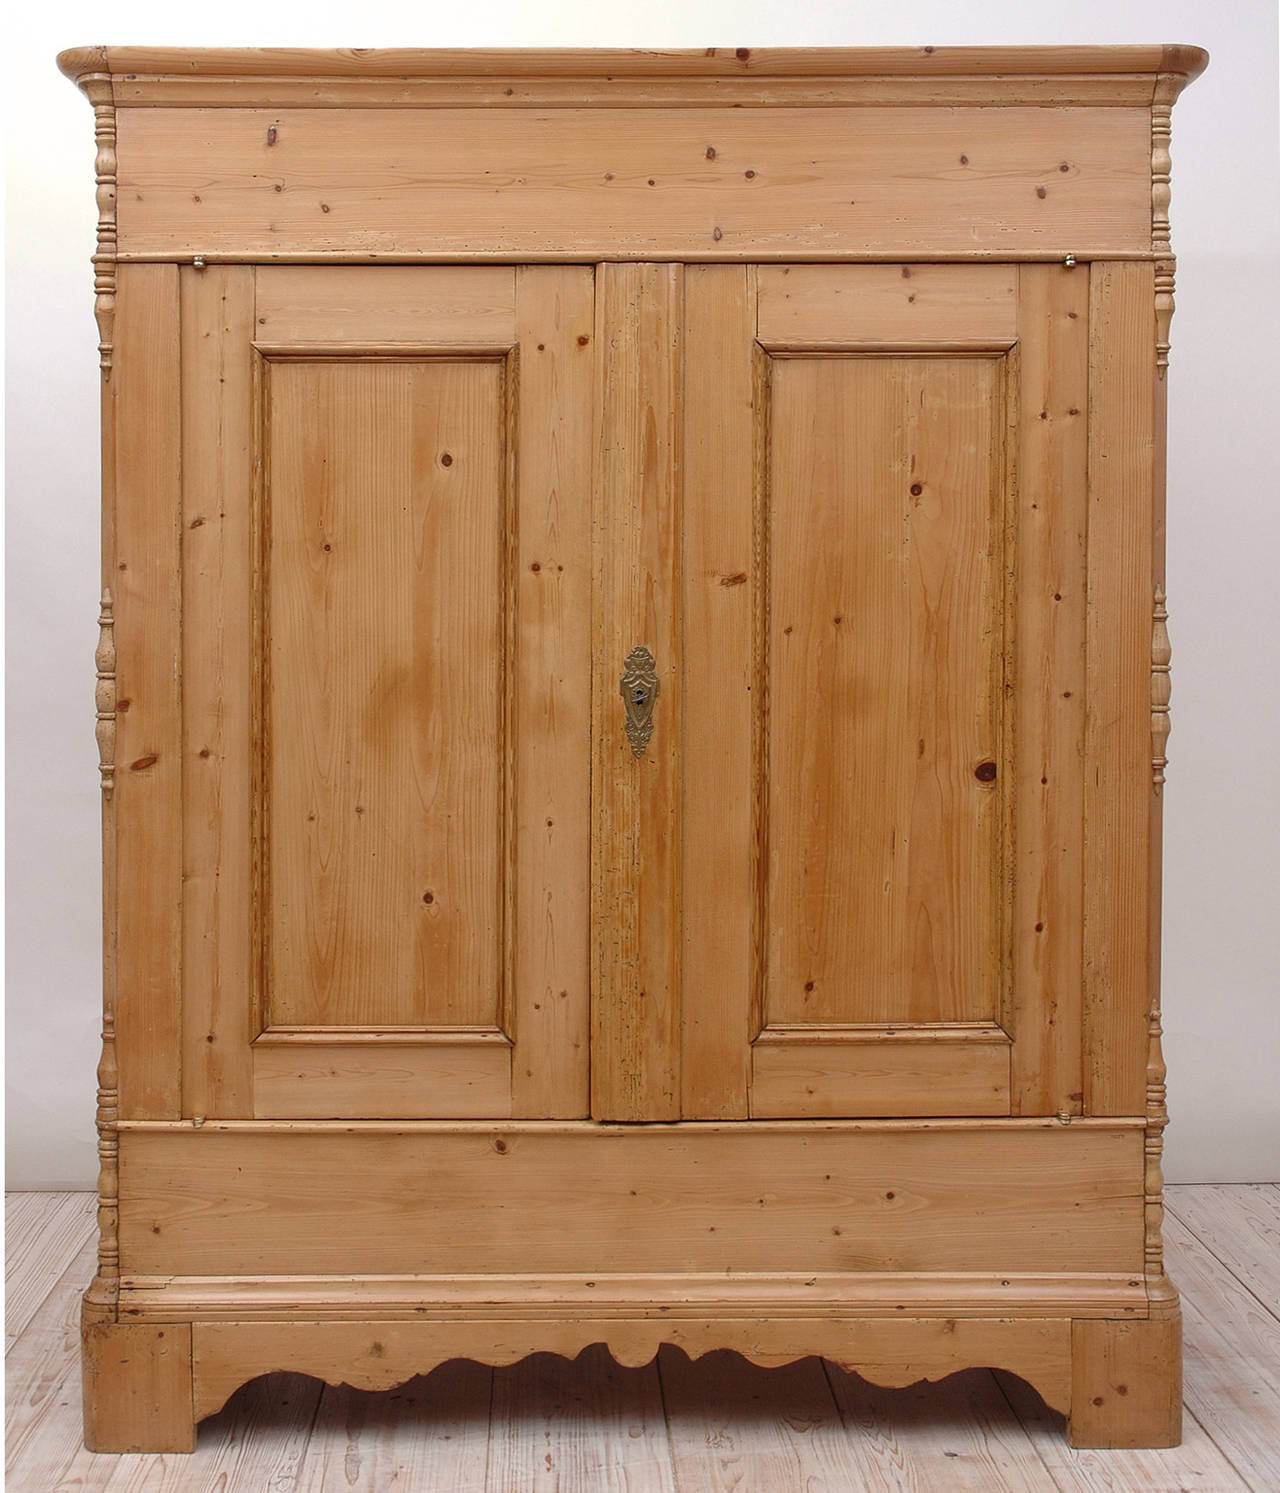 The word that comes to mind when looking at this armoire is 